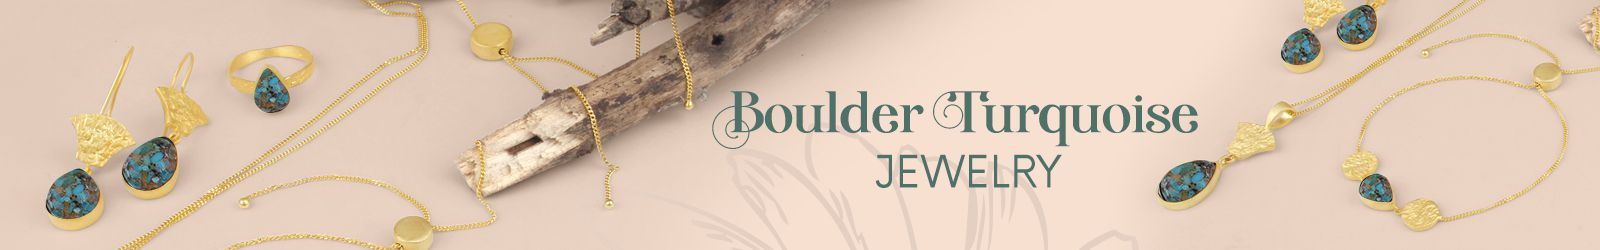 Silver Boulder Turquoise Jewelry Wholesale Supplier